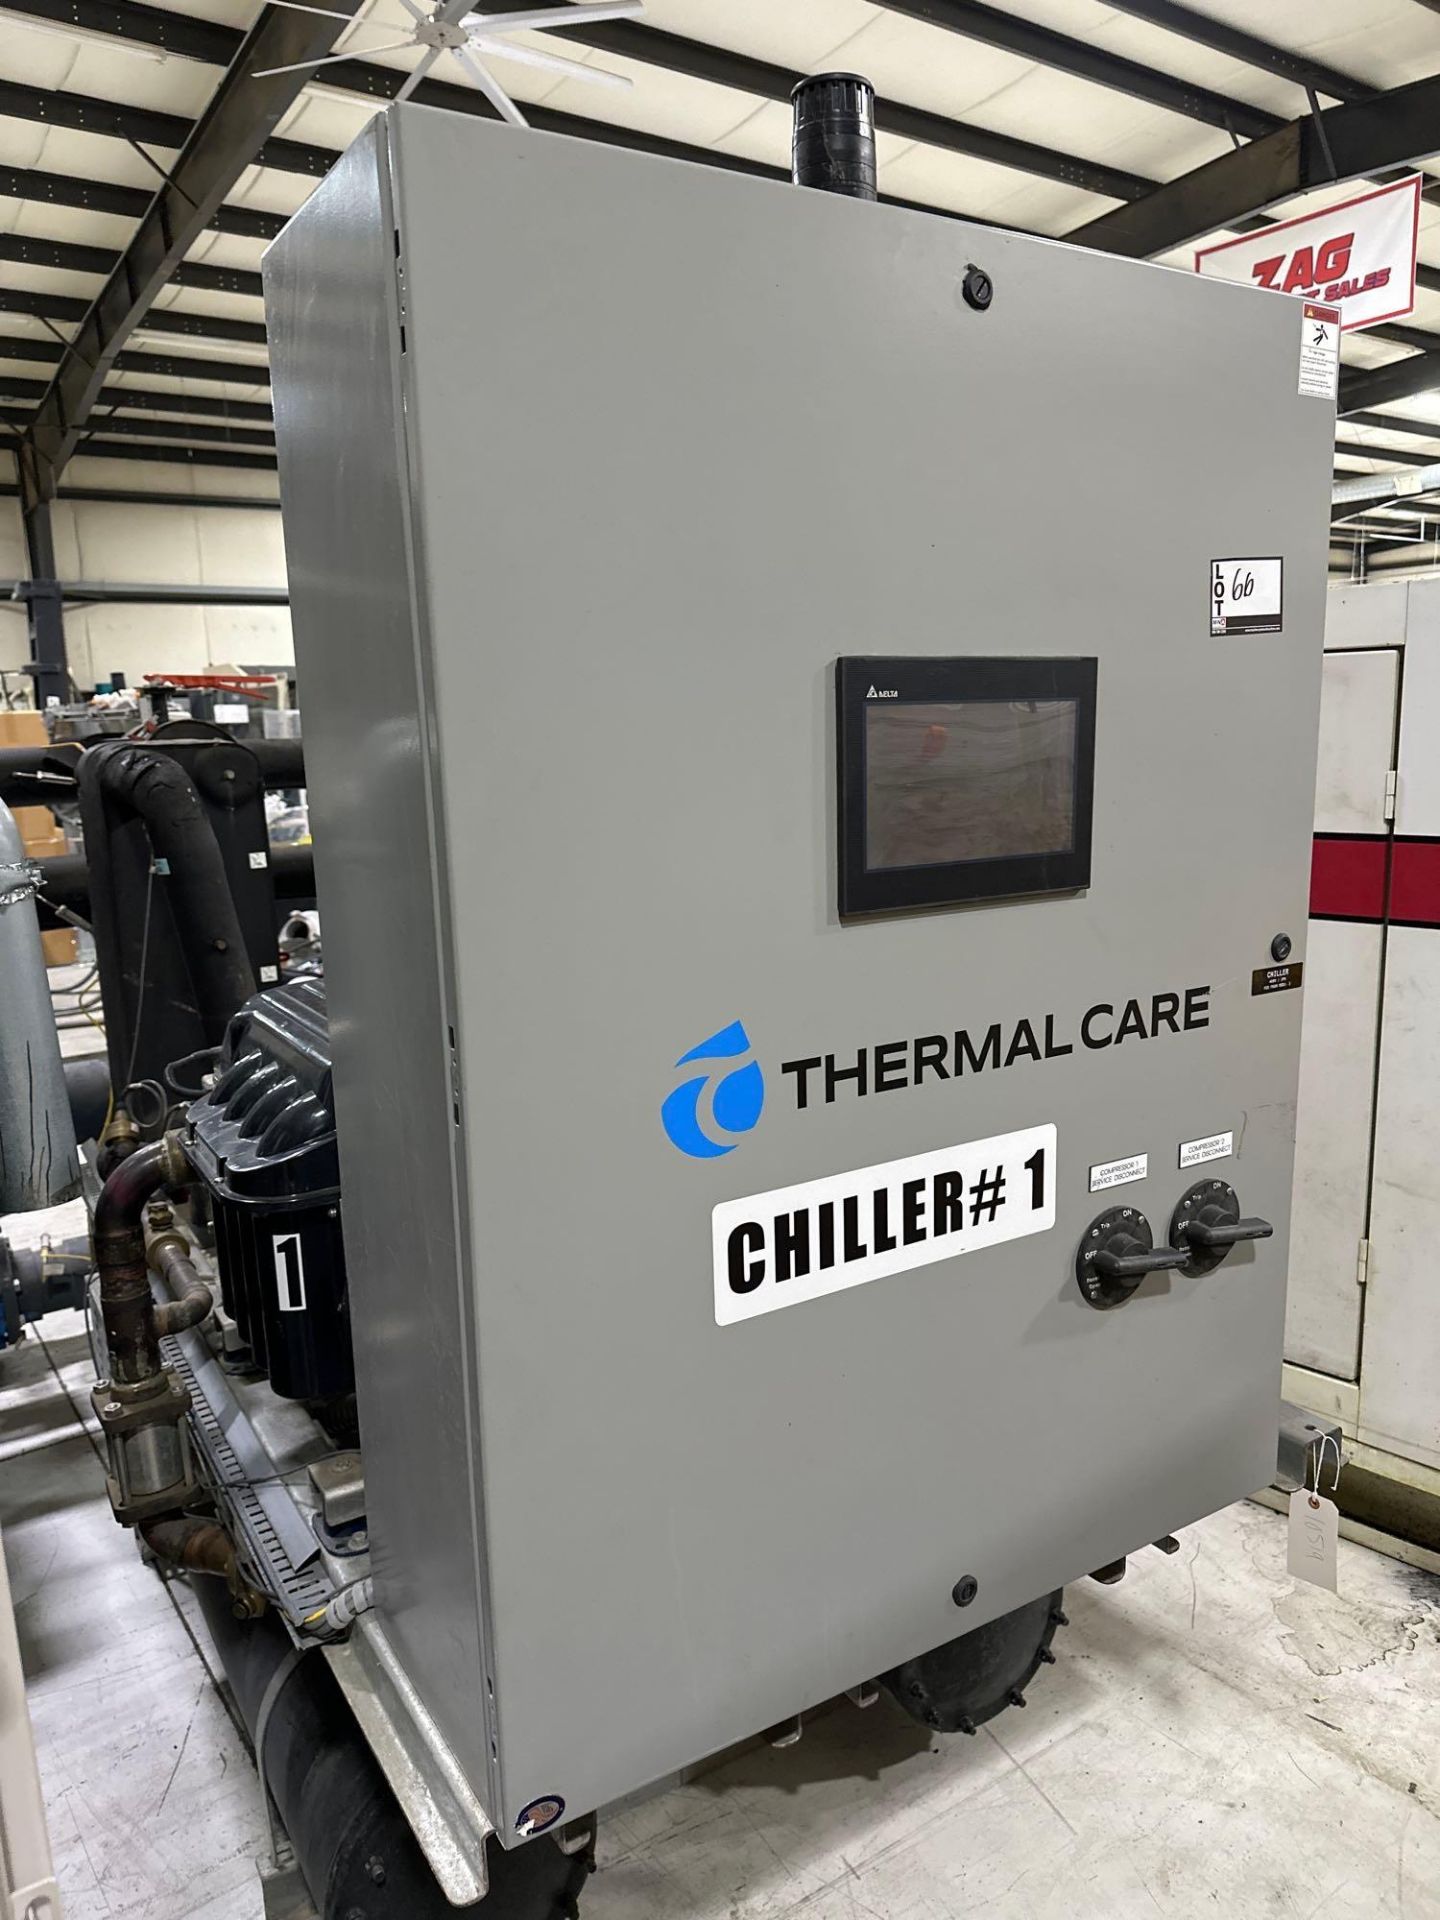 Thermal Care TCW600C411401N Chiller, 180 Ton Centrifugal Chiller, (2) Compressors, 460V/3/60 - Image 2 of 6